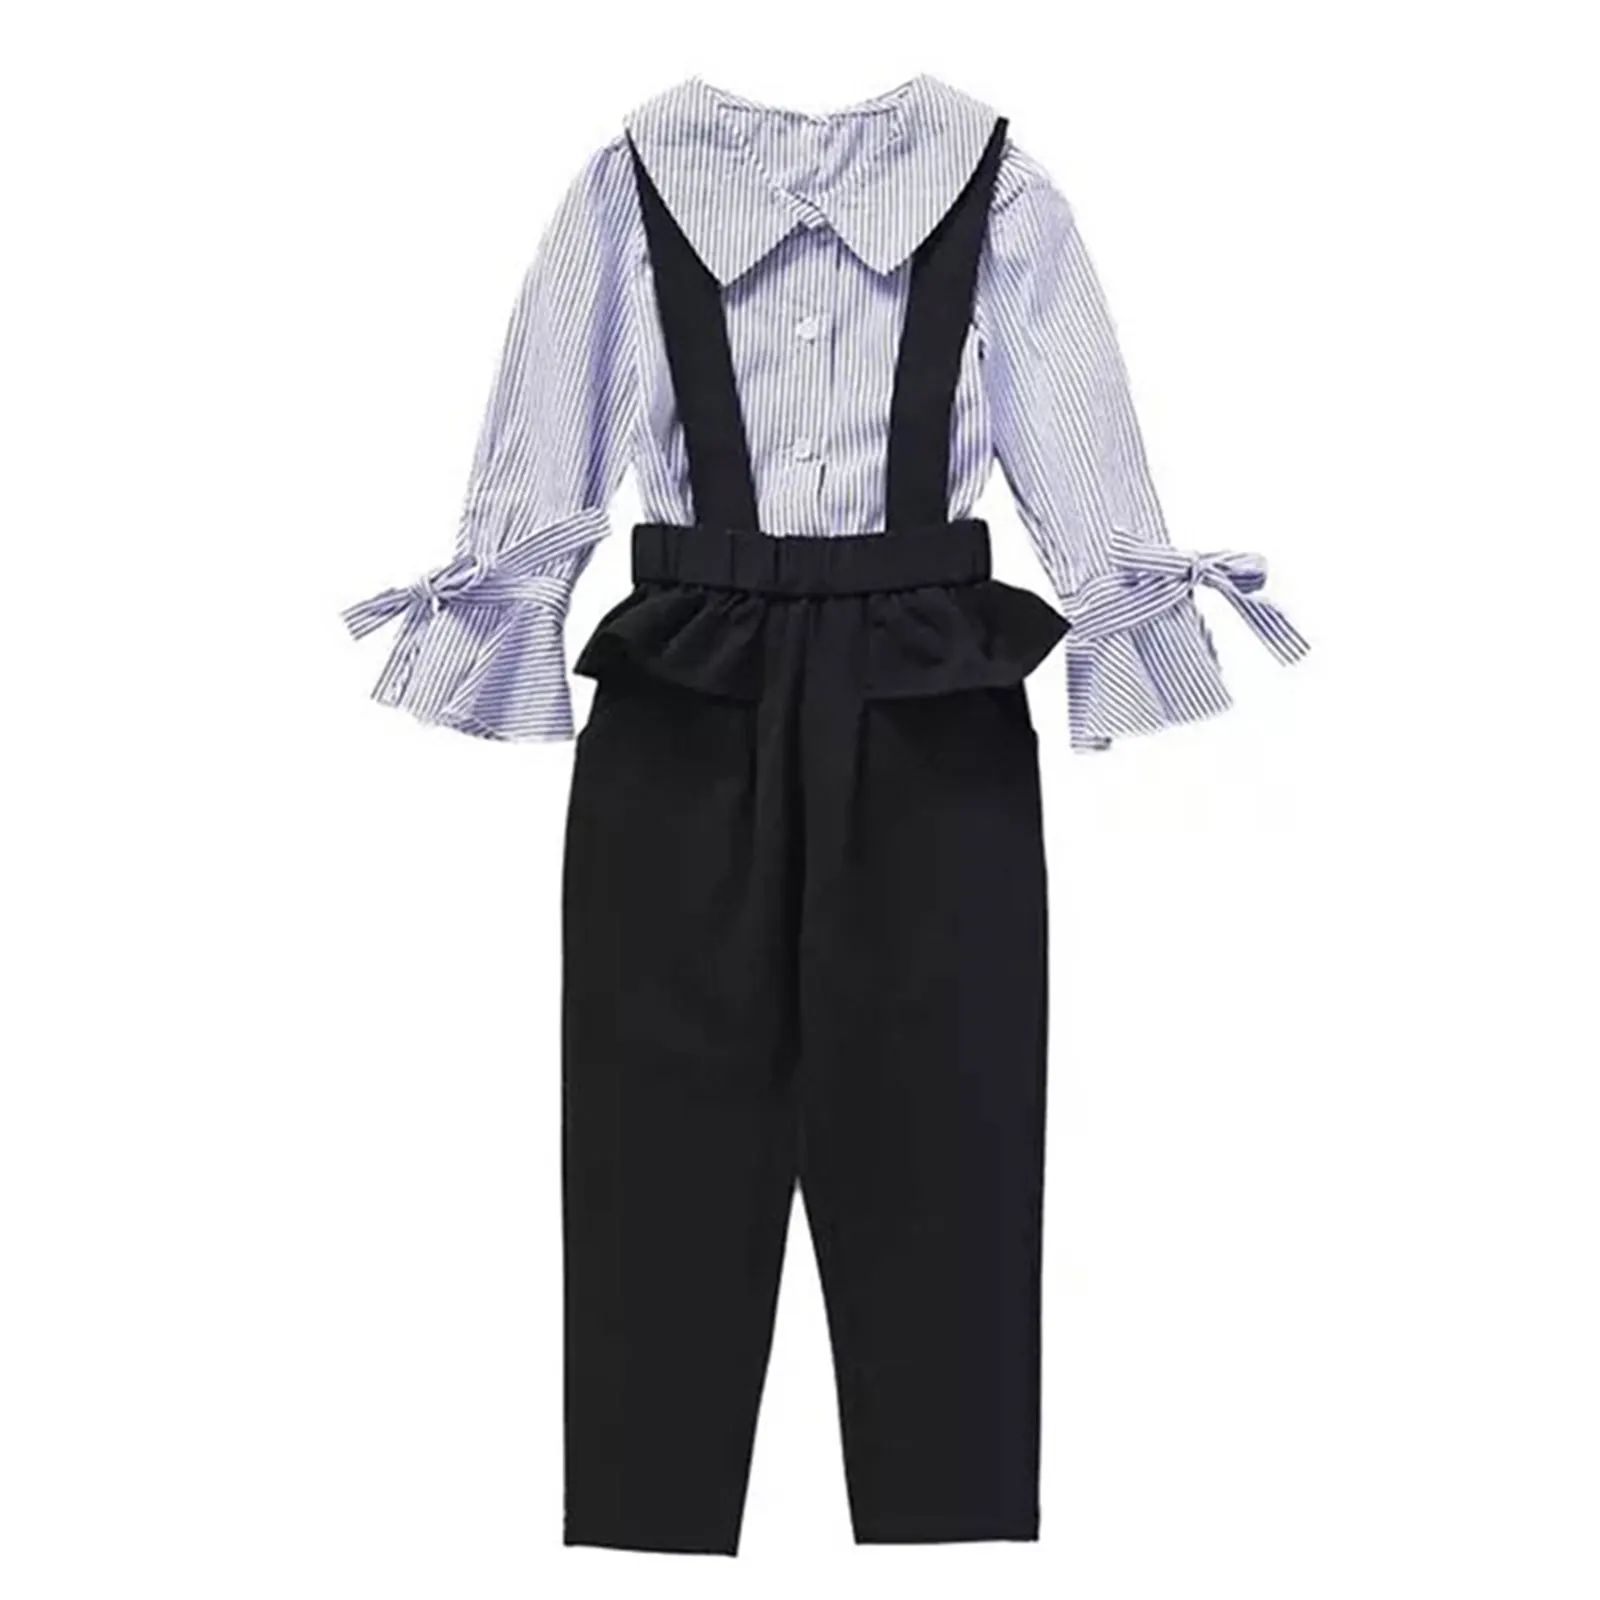 

Spring Autumn Kids Girls Clothes Set Flared Long Sleeve Stripes Shirt Tops Suspenders Pants Trousers 2Pcs Teenage Girls Outfits